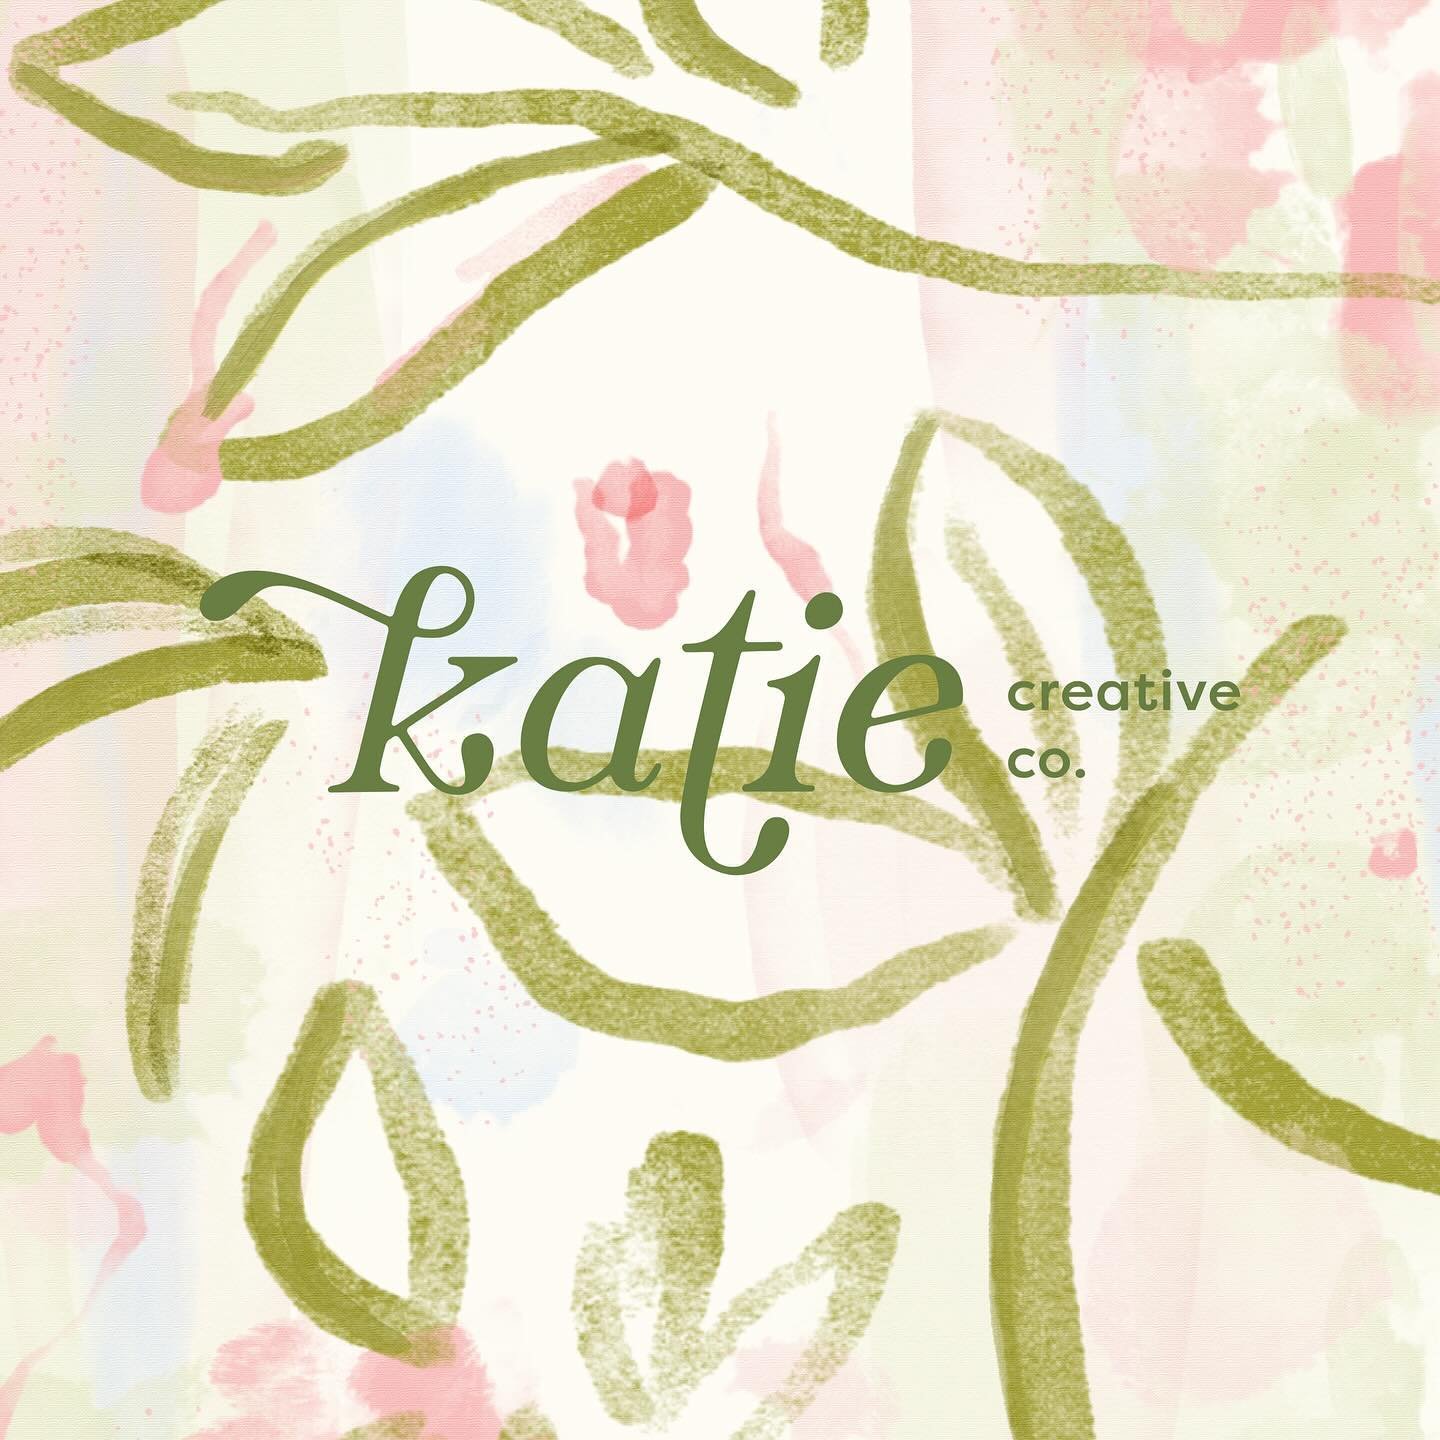 We&rsquo;re finallyyyy showing off the brand identity we designed for @katiecreativeco - a social media and content strategist based in Louisiana. Here&rsquo;s a sneak peek! 👀

Stay tuned for more as well roll out this beautiful branding within the 